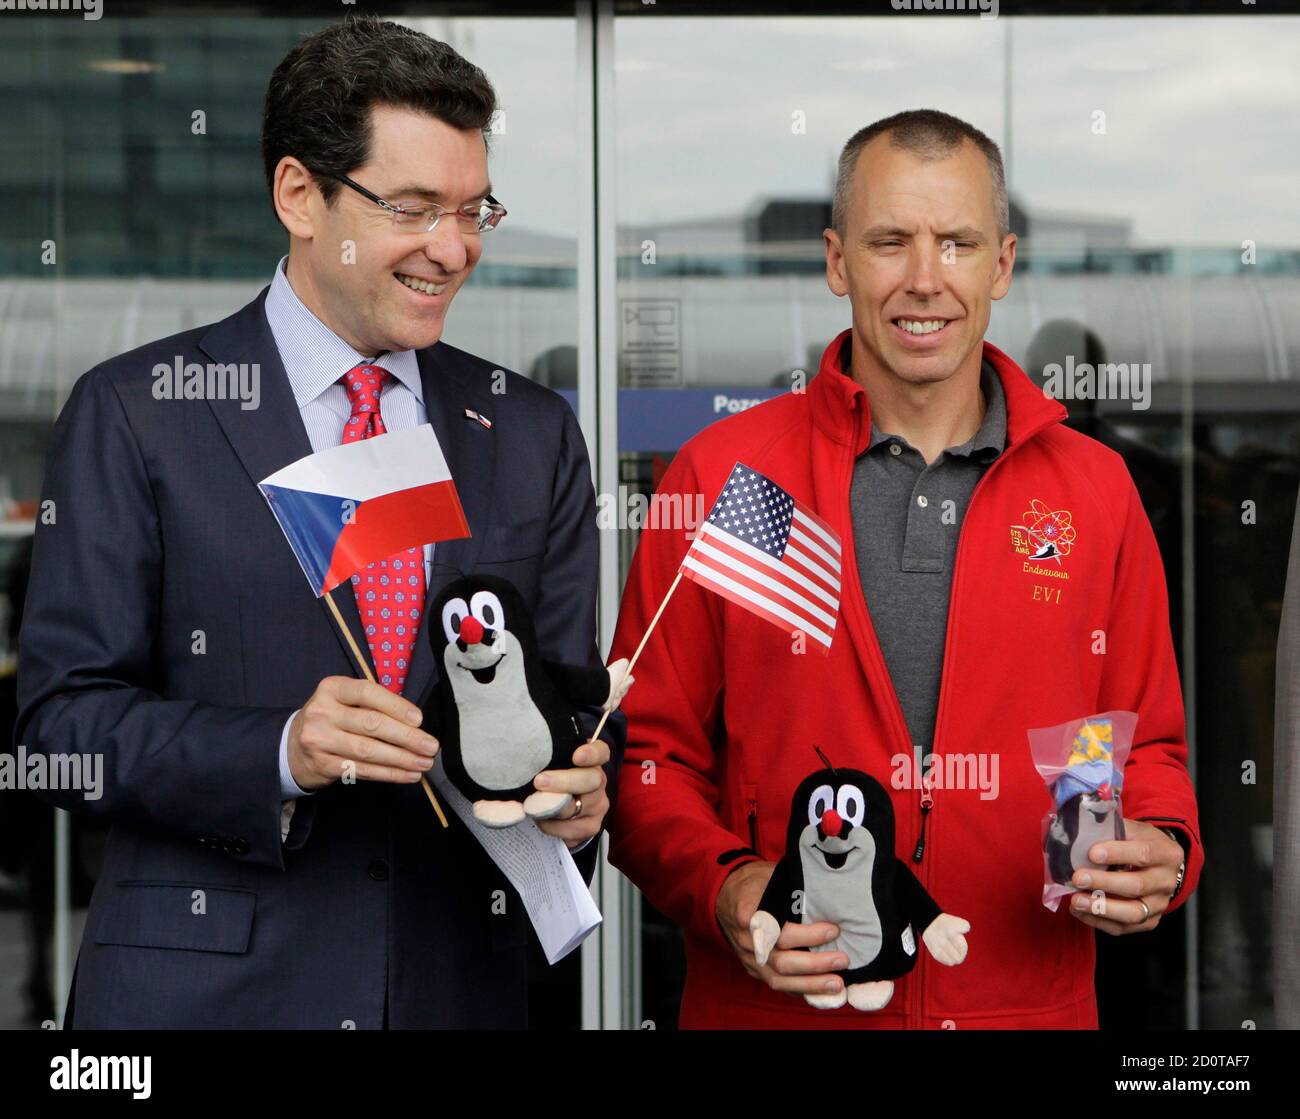 U.S. ambassador to the Czech Republic Norman L. Eisen (L) and U.S.  astronaut Andrew Feustel hold stuffed toys of Krtek the Mole, a well-known  figure from the Czech animated cartoon series, at